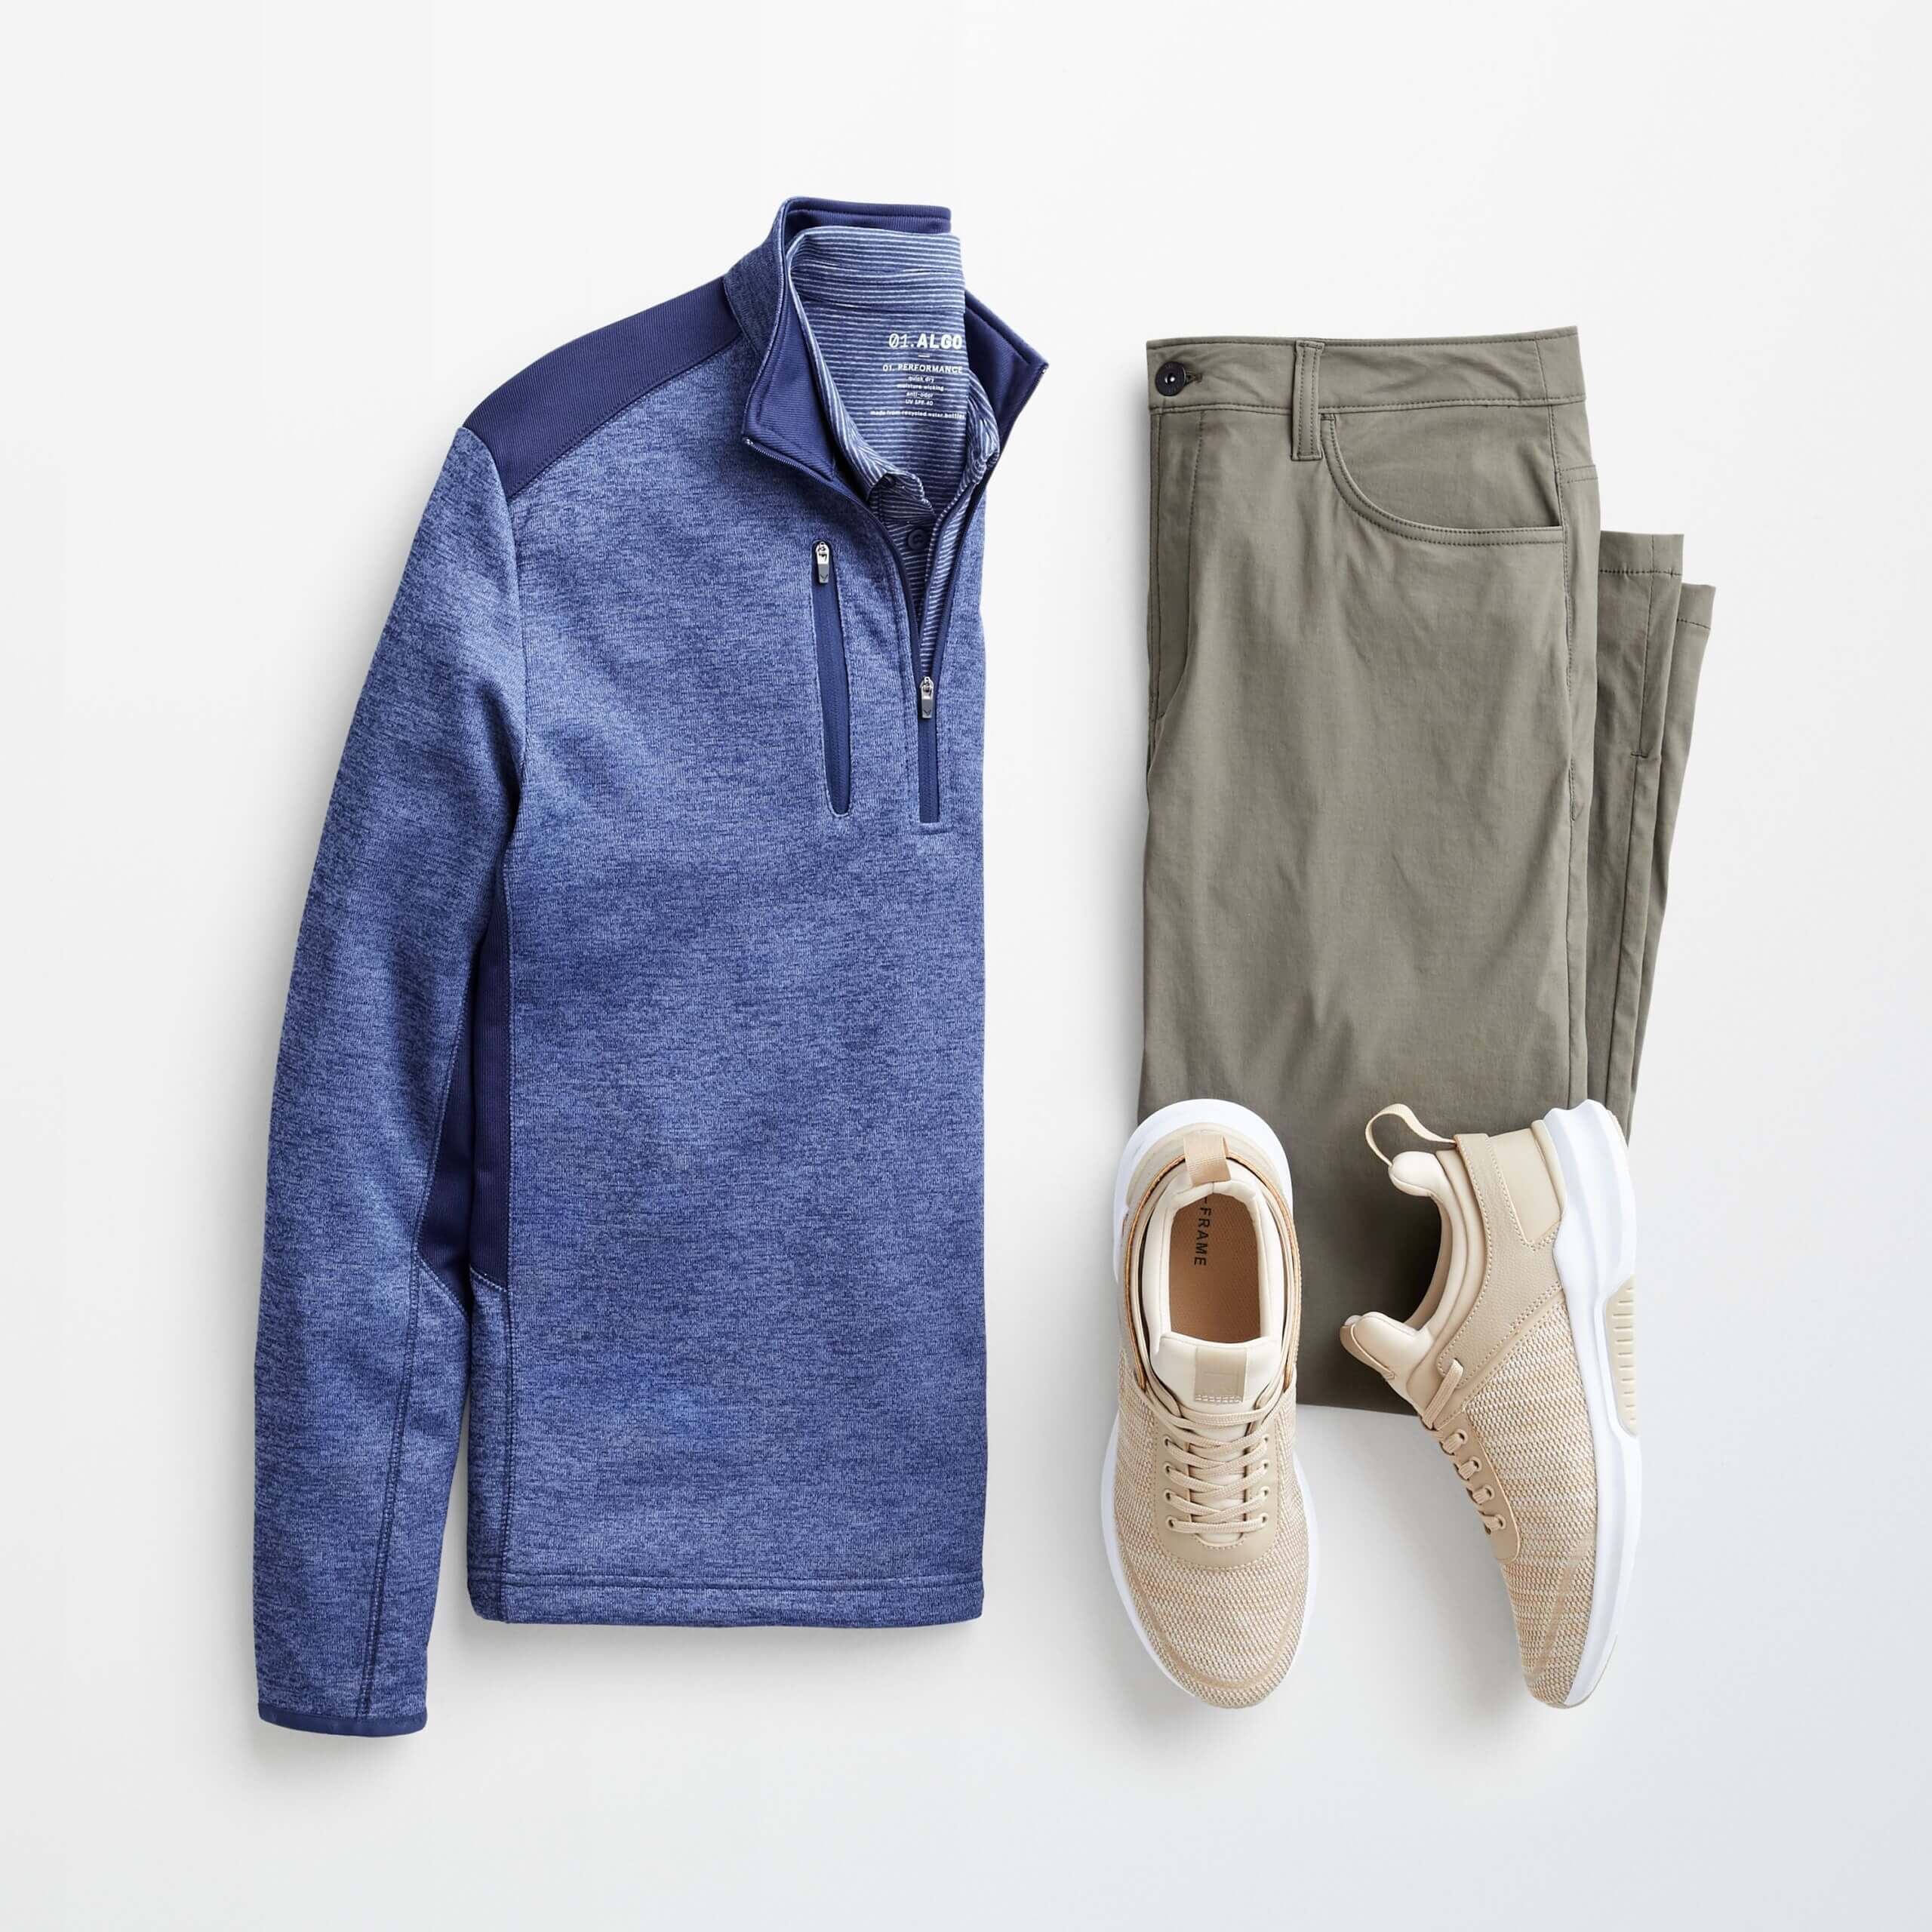 Stitch Fix Men’s outfit laydown featuring grey tech pants, blue 1/4 zip pullover and beige sneakers. 